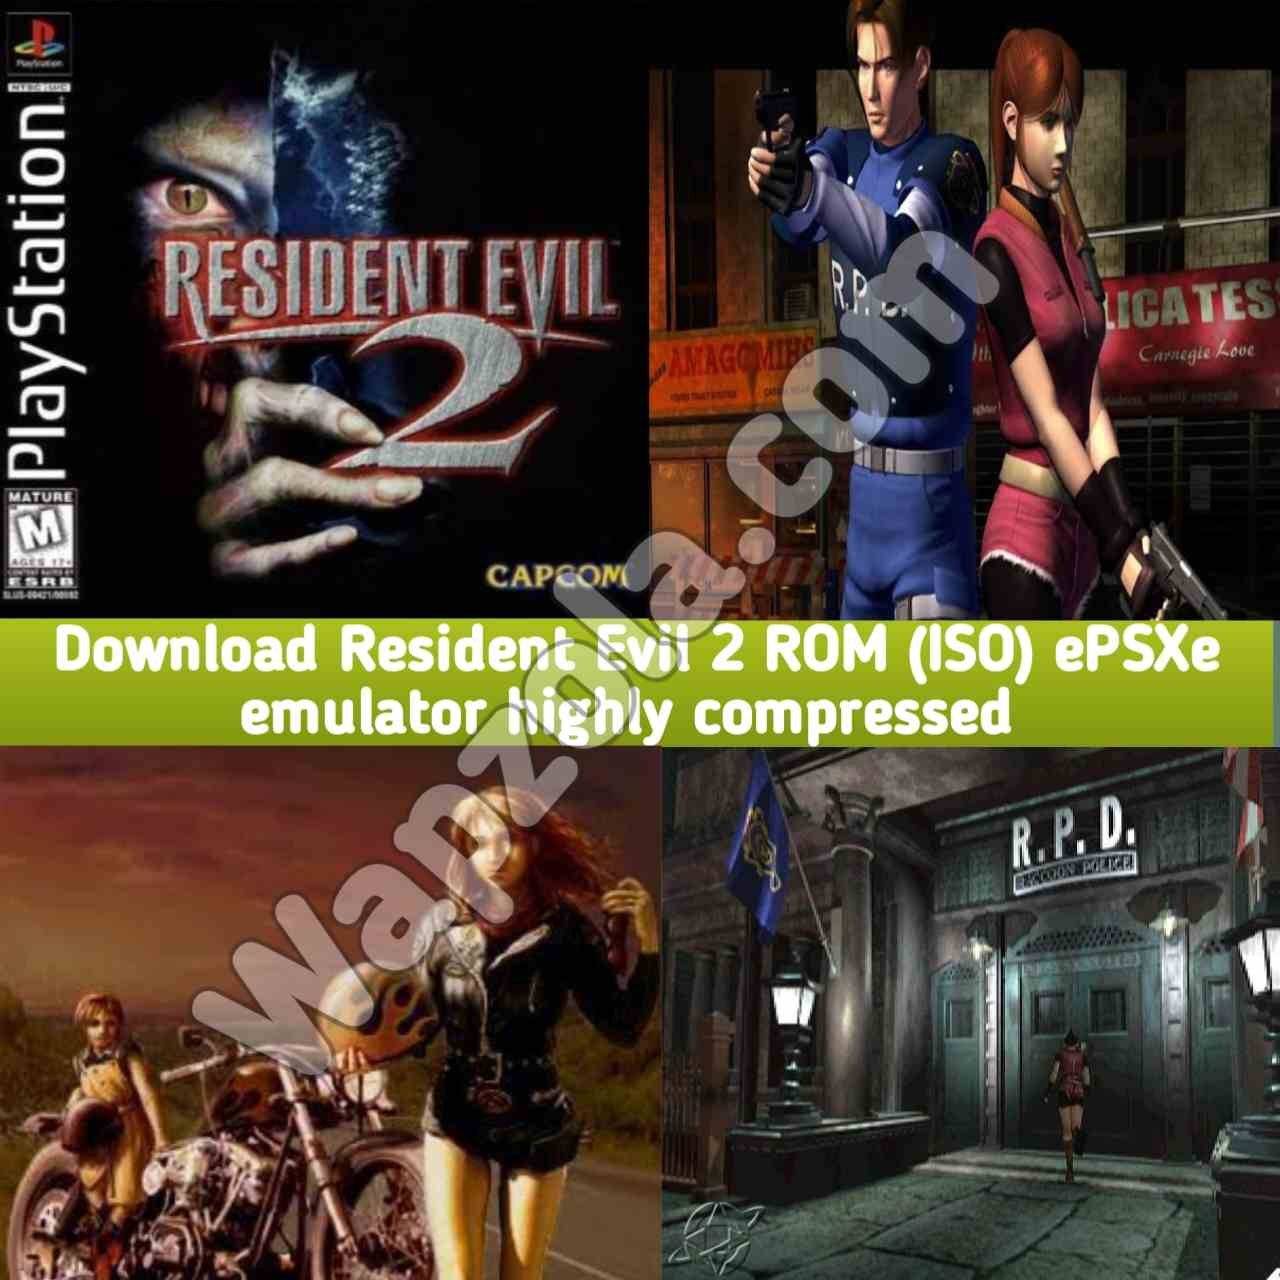 [Download] Resident Evil 2 ROM (ISO) ePSXe and Fpse emulator (50MB size) highly compressed – Sony Playstation / PSX / PS1 APK BIN/CUE play on Android and pc